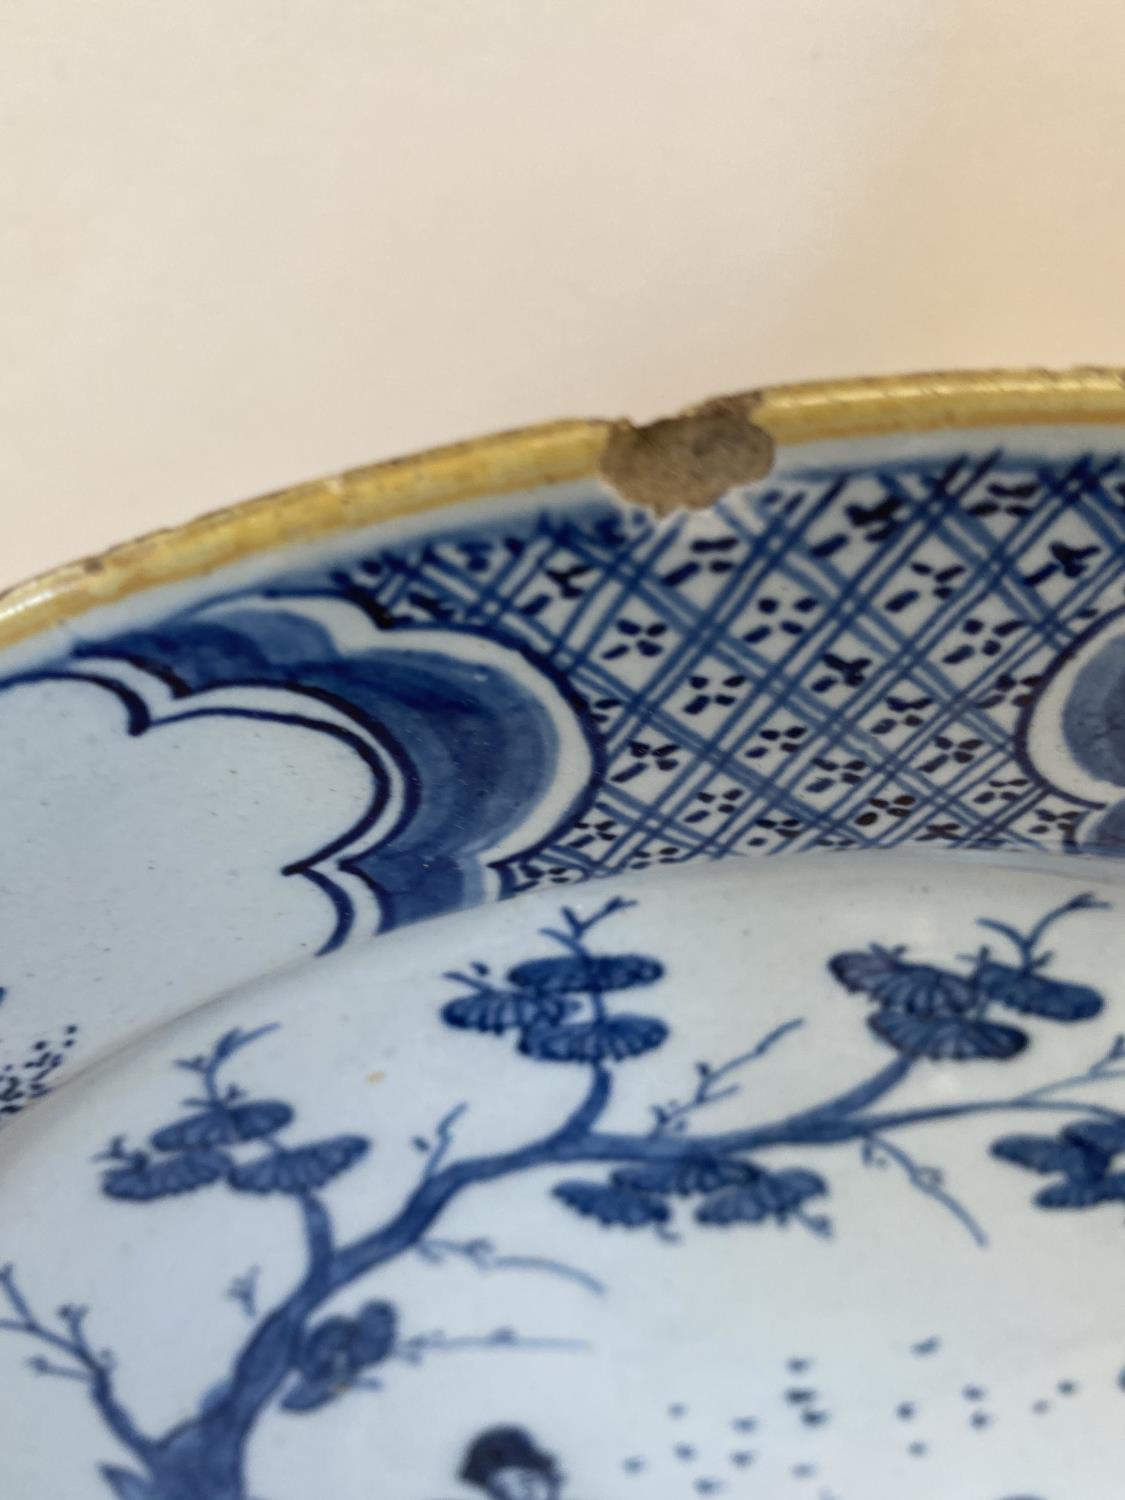 Tin glazed Delft plate 29cm diam, (rim chipped), Imari circular plate cracked and a florally - Image 7 of 8